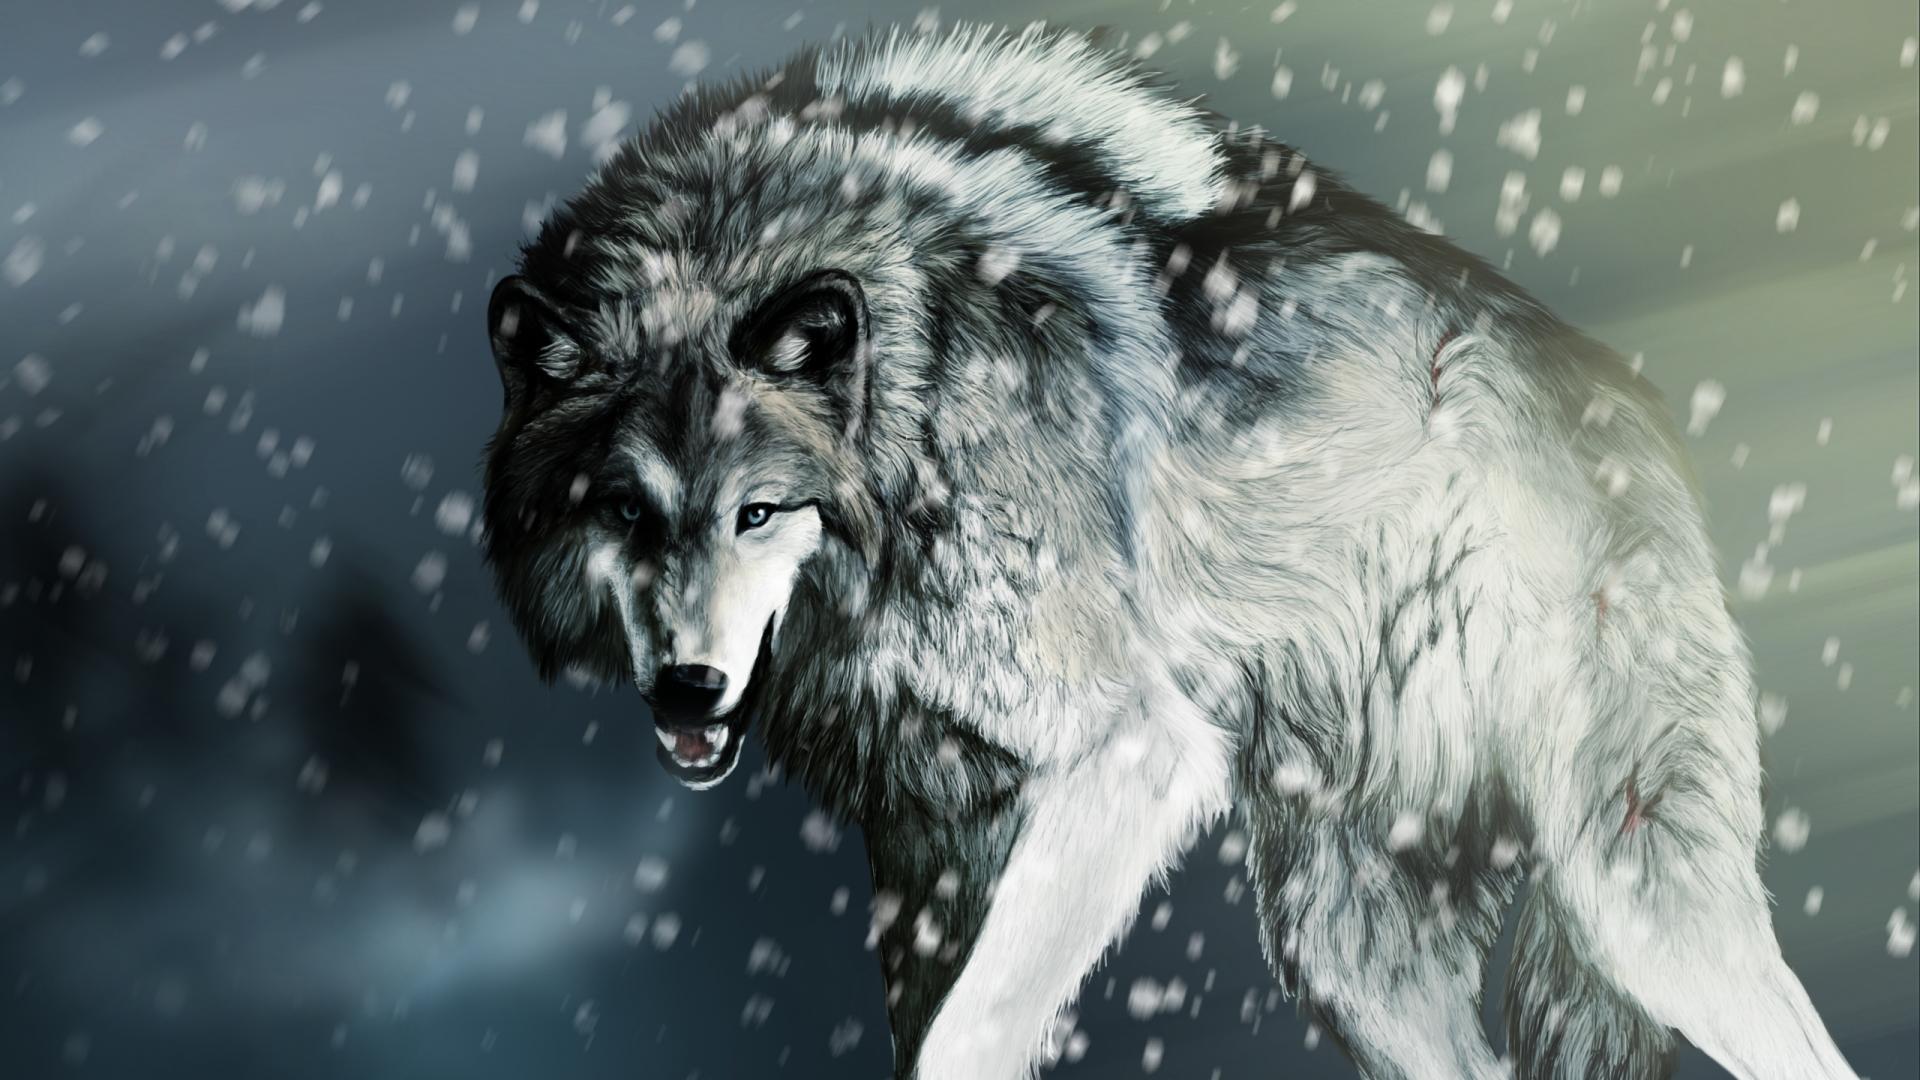 snarling gray wolf new desktop wallpapers wide free in high resolution